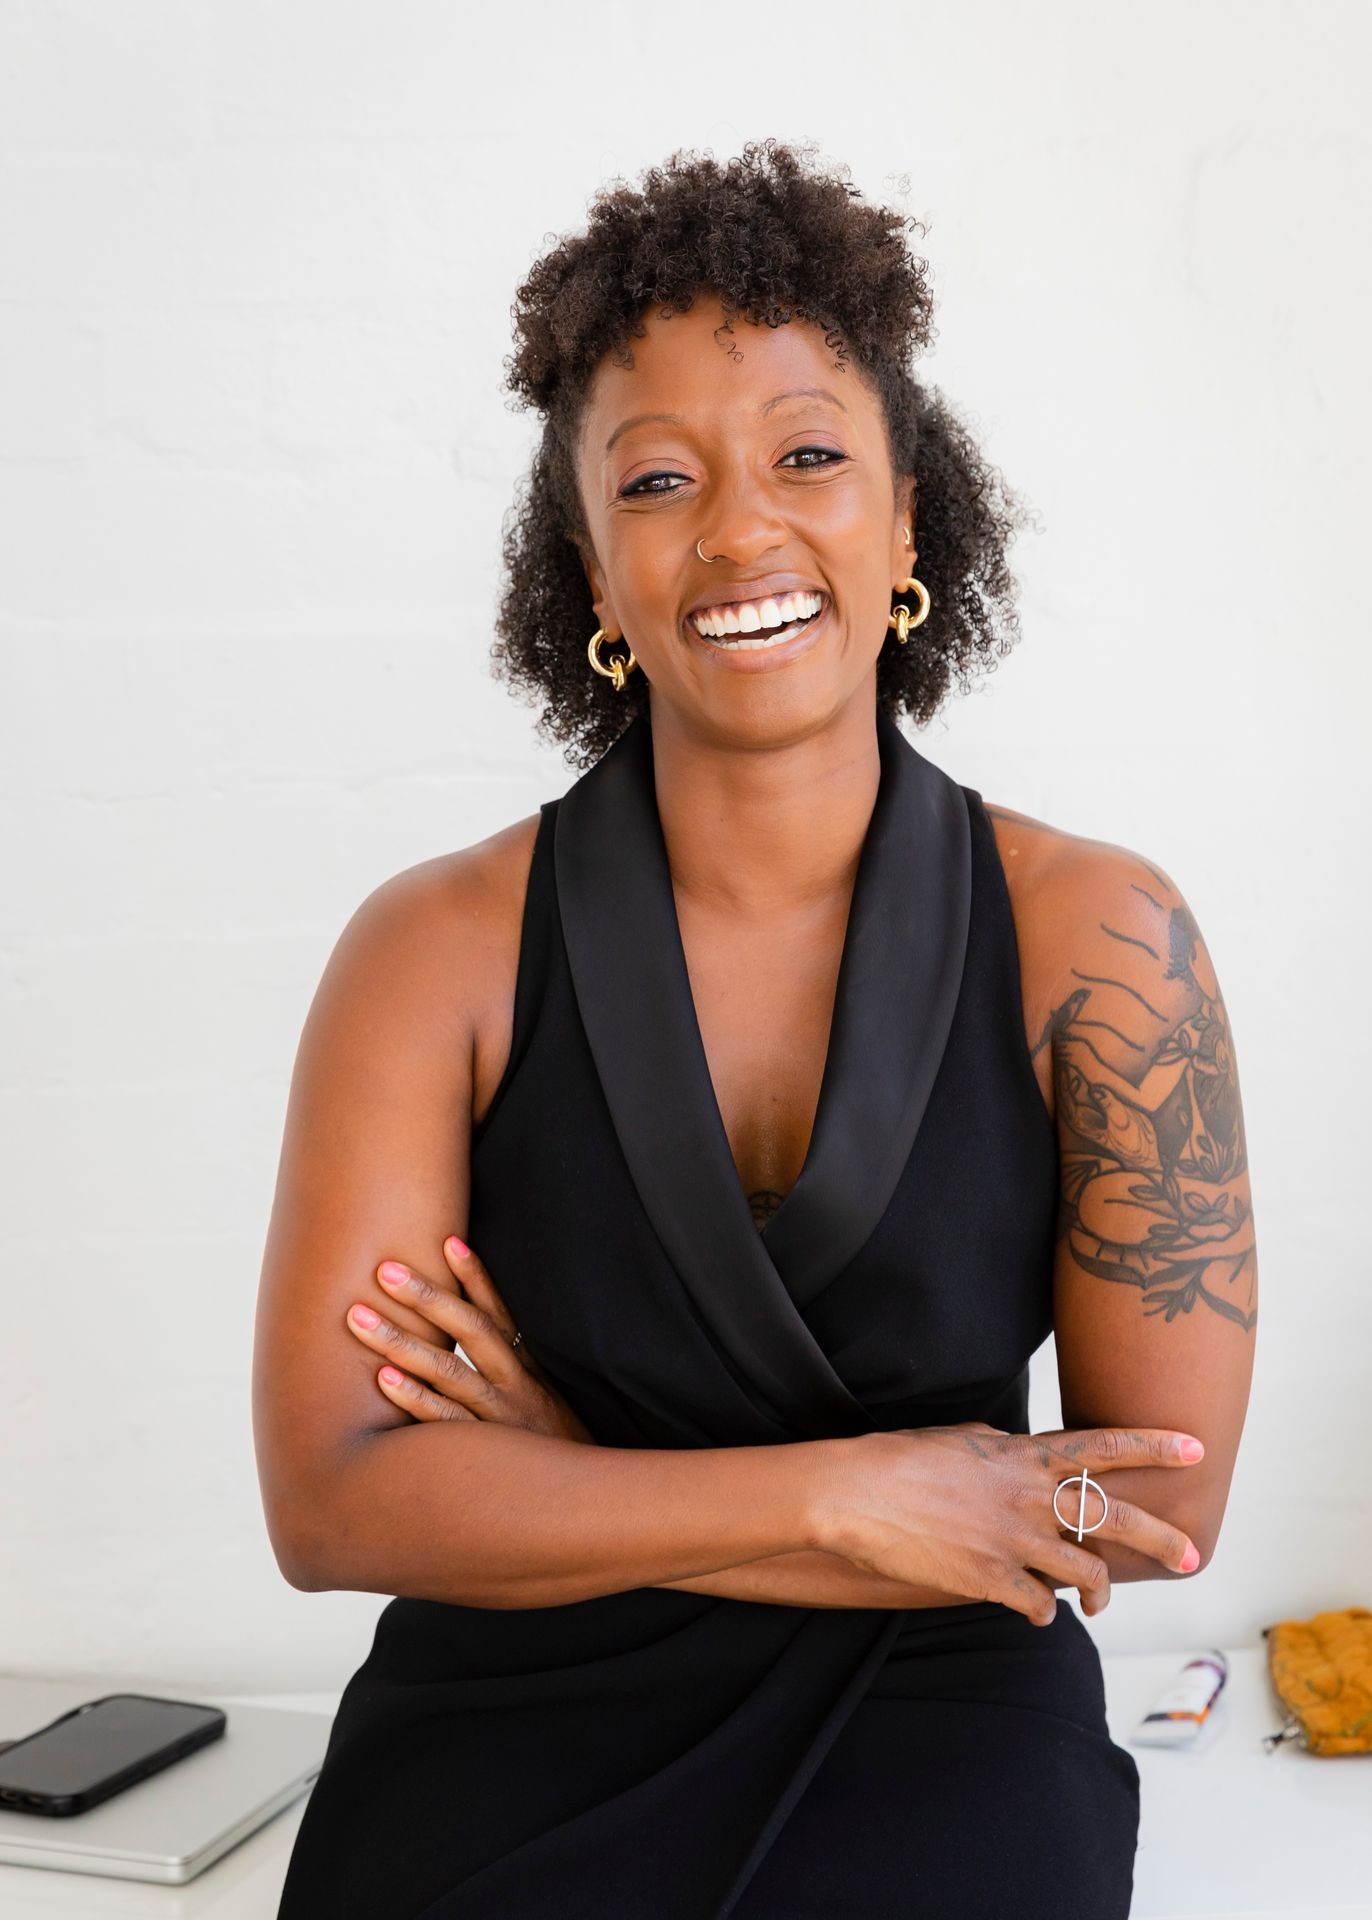 Black woman CEO wearing black dress crossed arms with tattoo